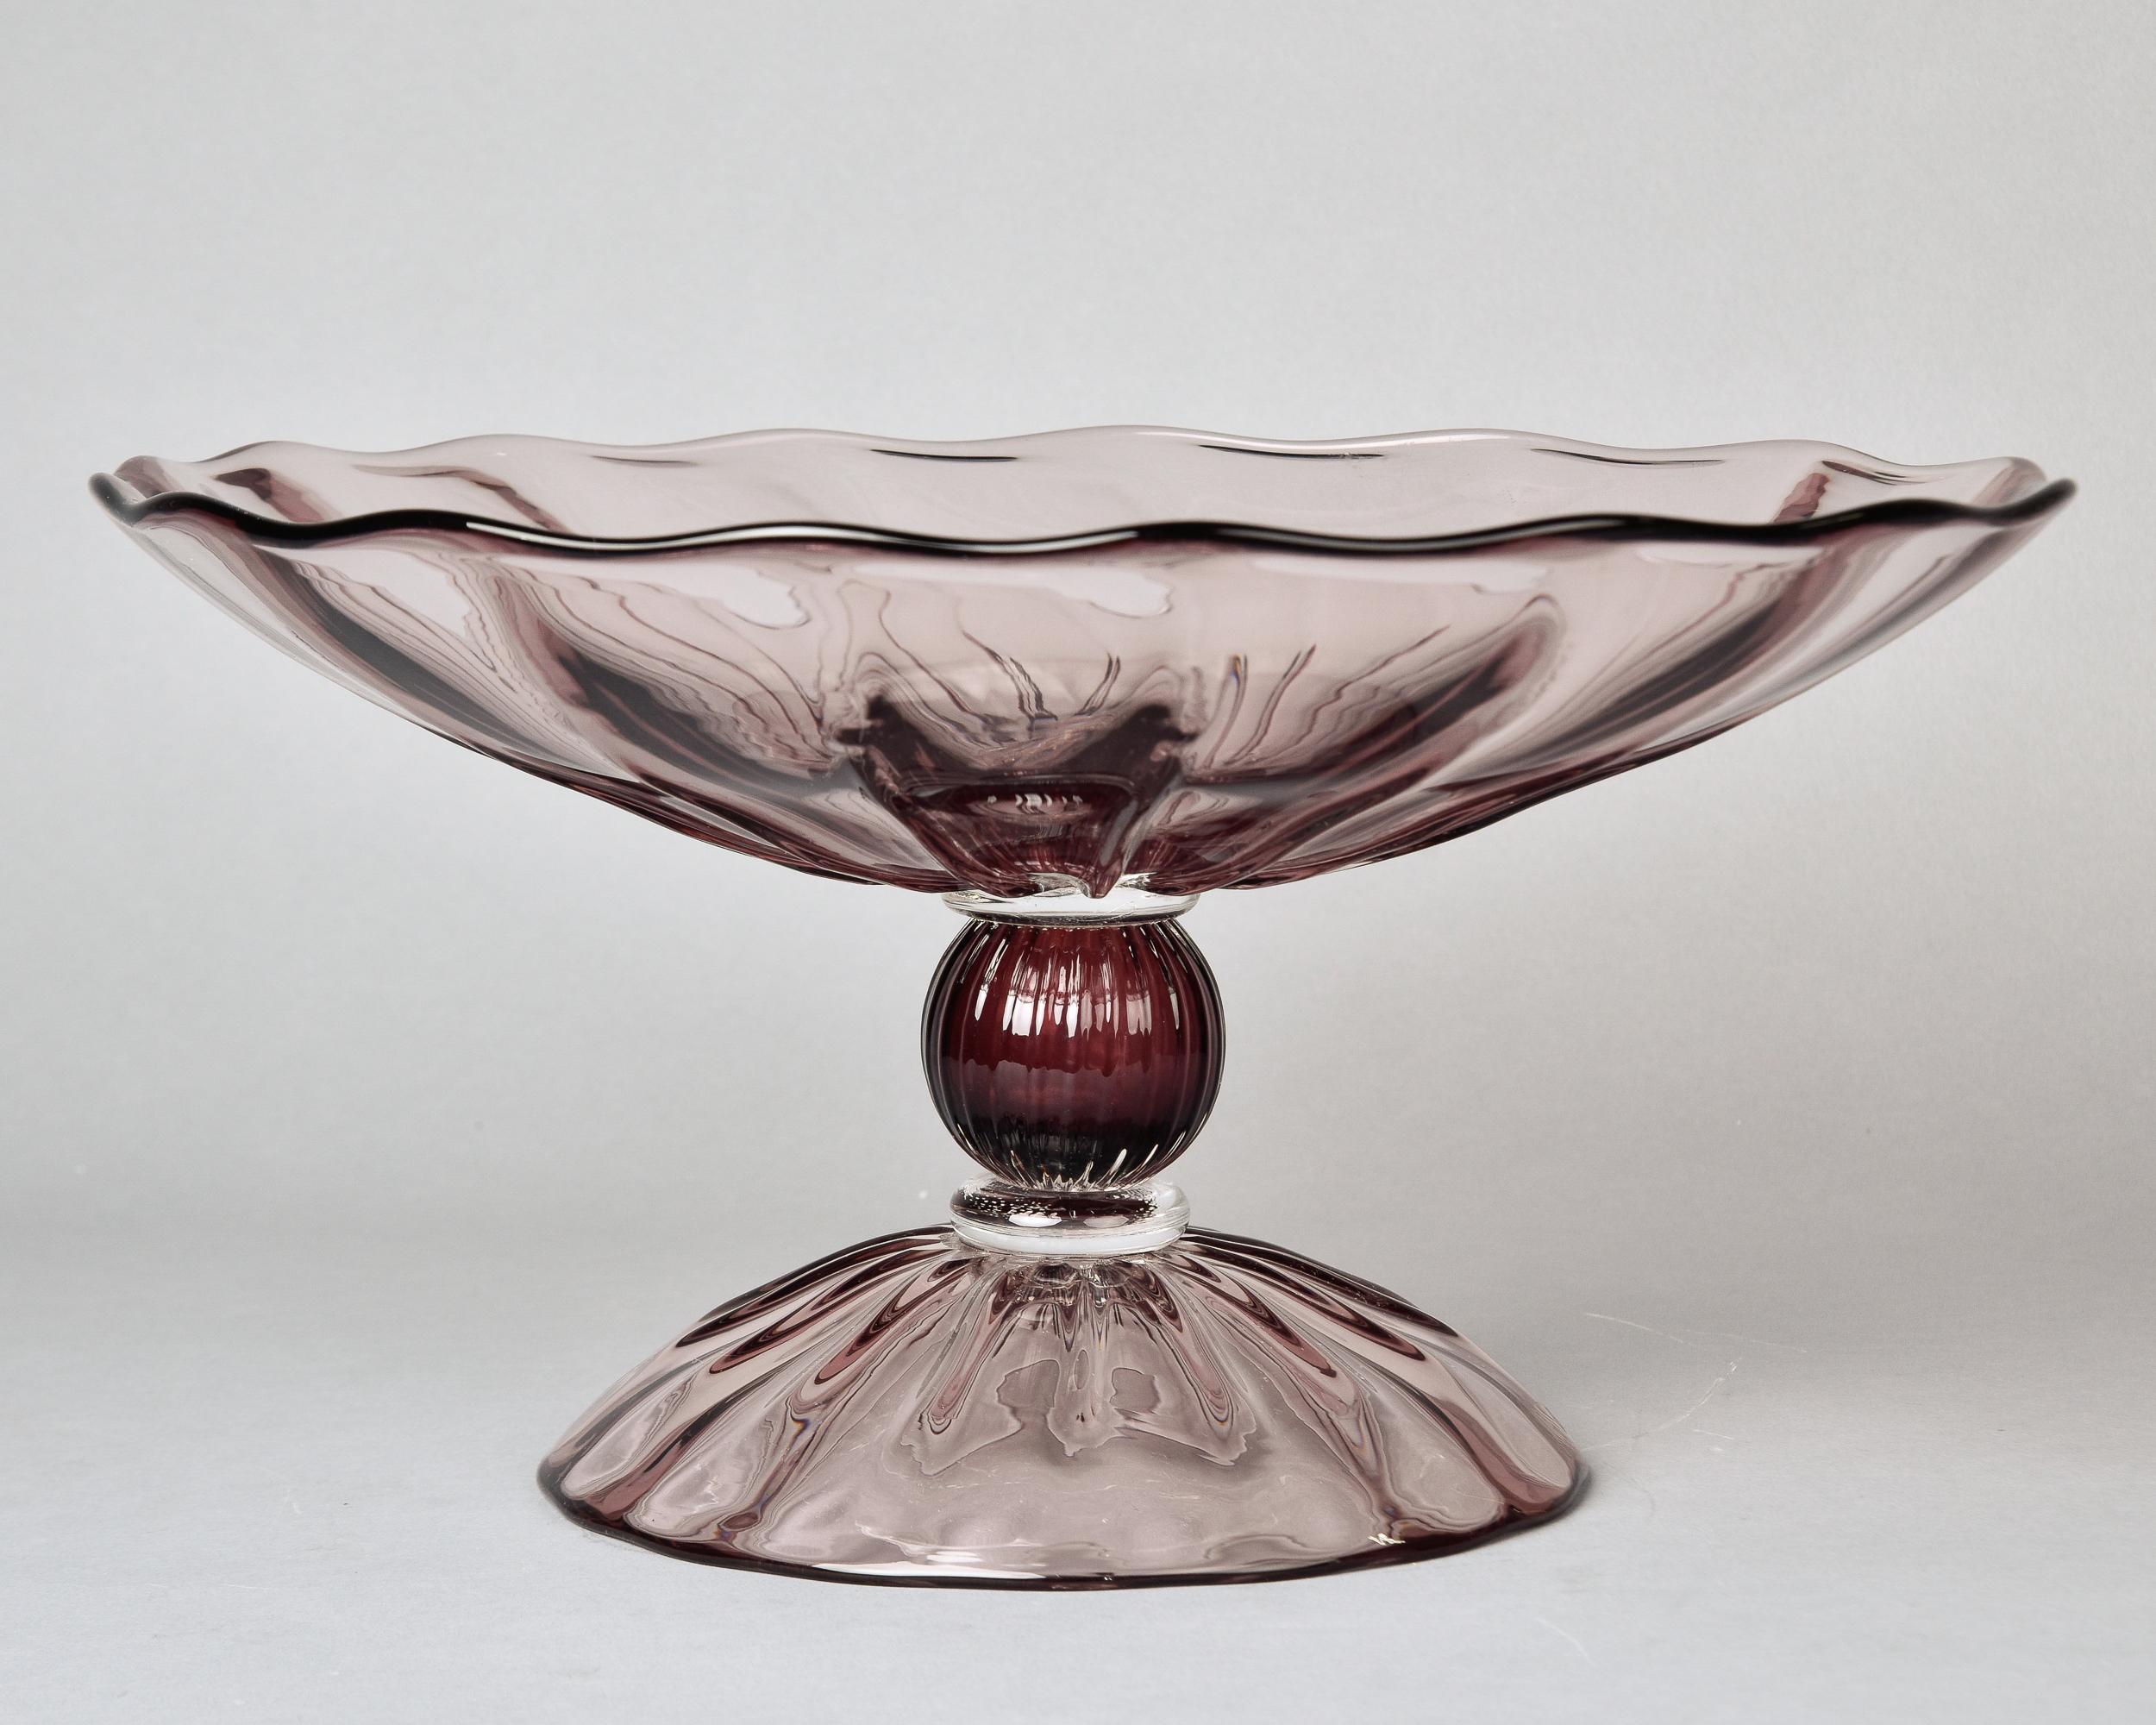 Large Vintage Signed Roberto Cavalli Pale Amethyst Glass Tazza or Pedestal Bowl For Sale 3